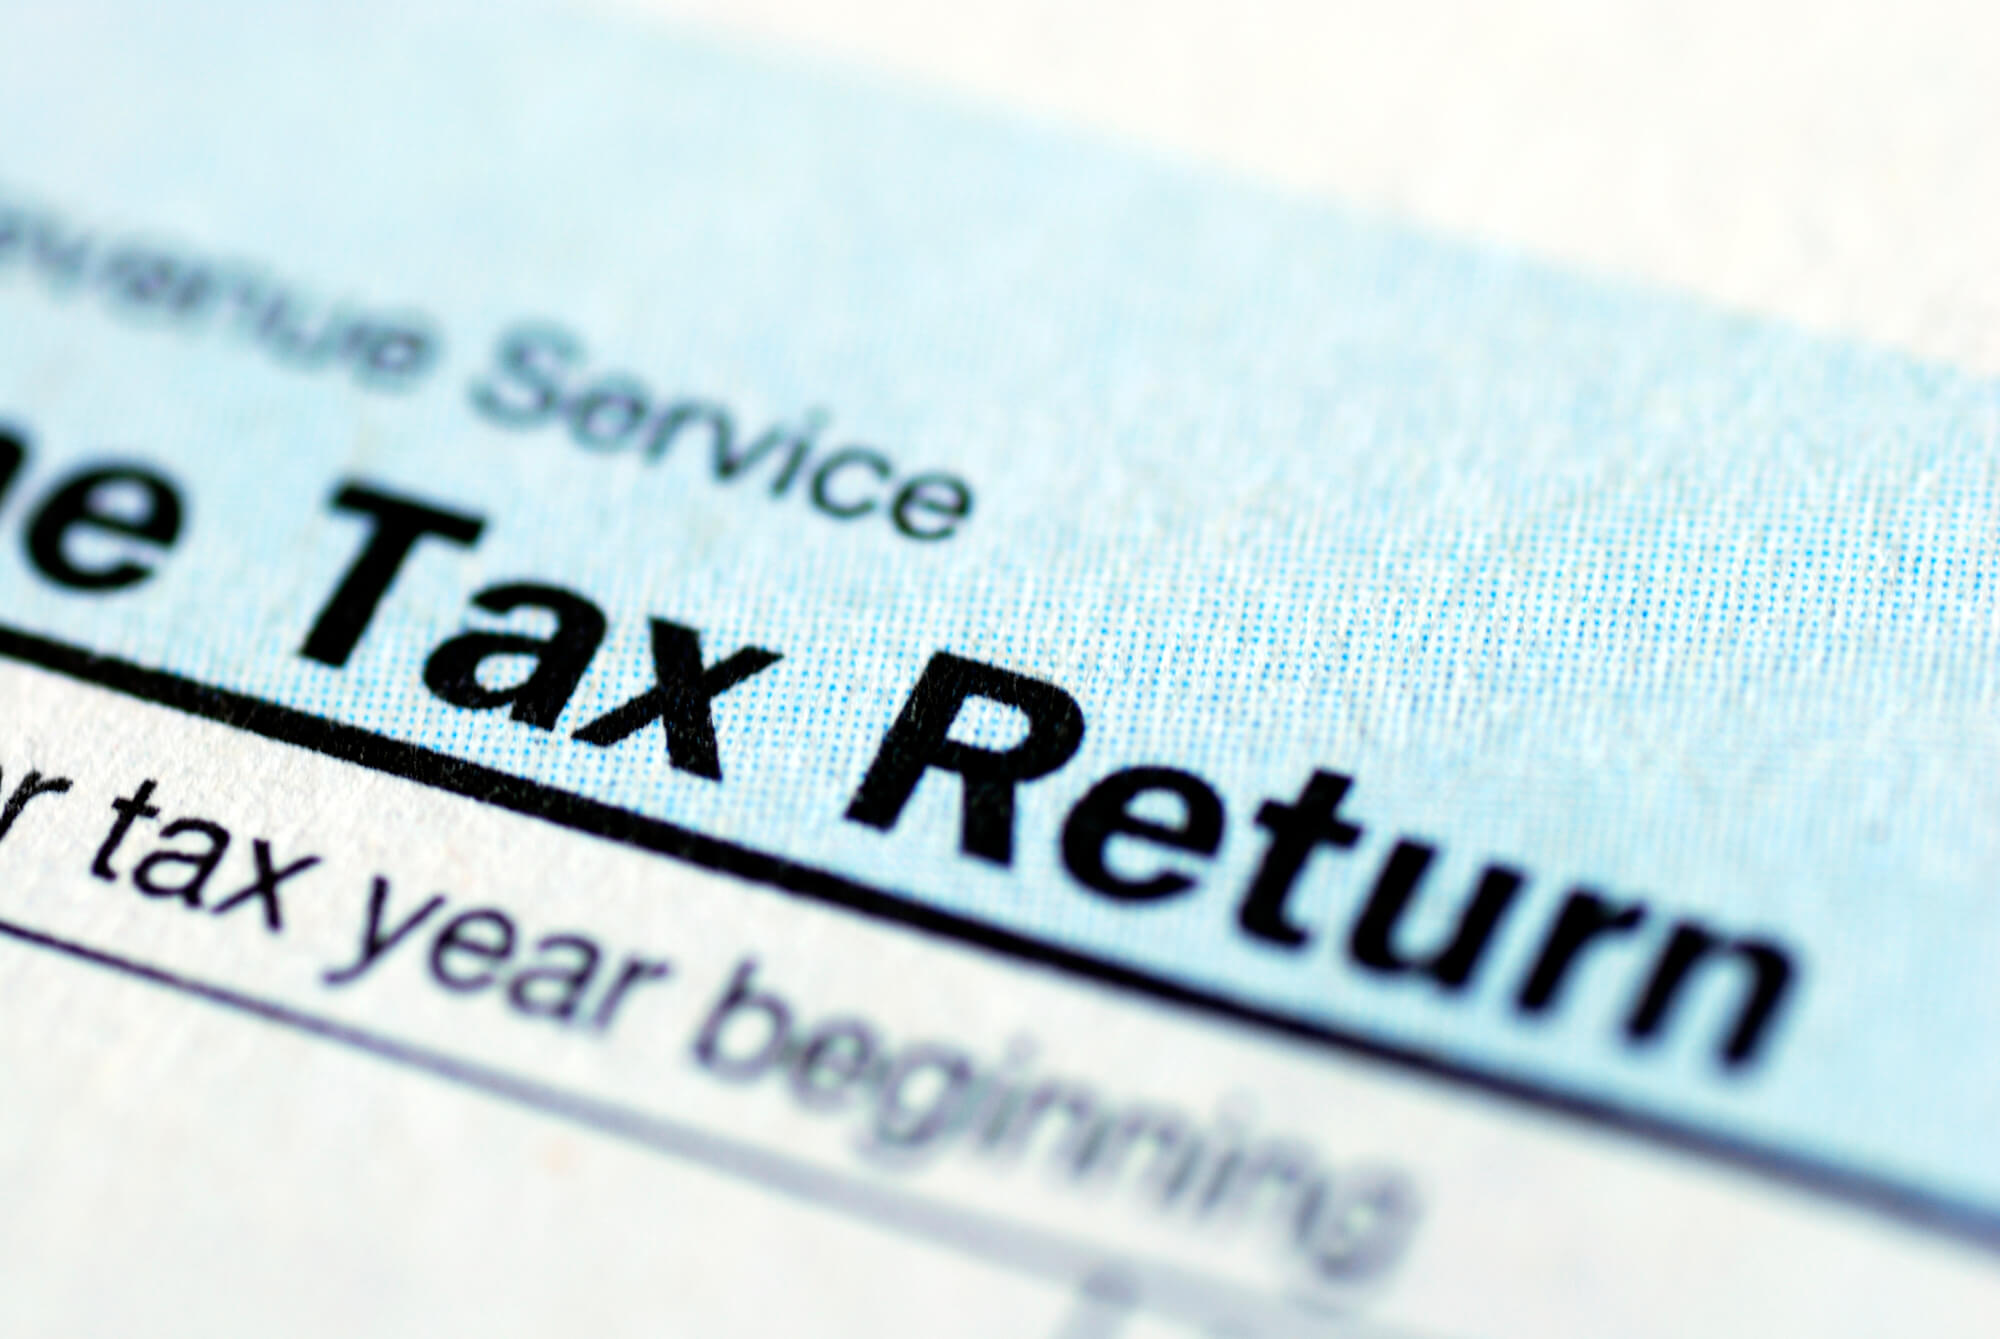 the Best Tax Preparation Firm in Weston will prepare and file your tax return